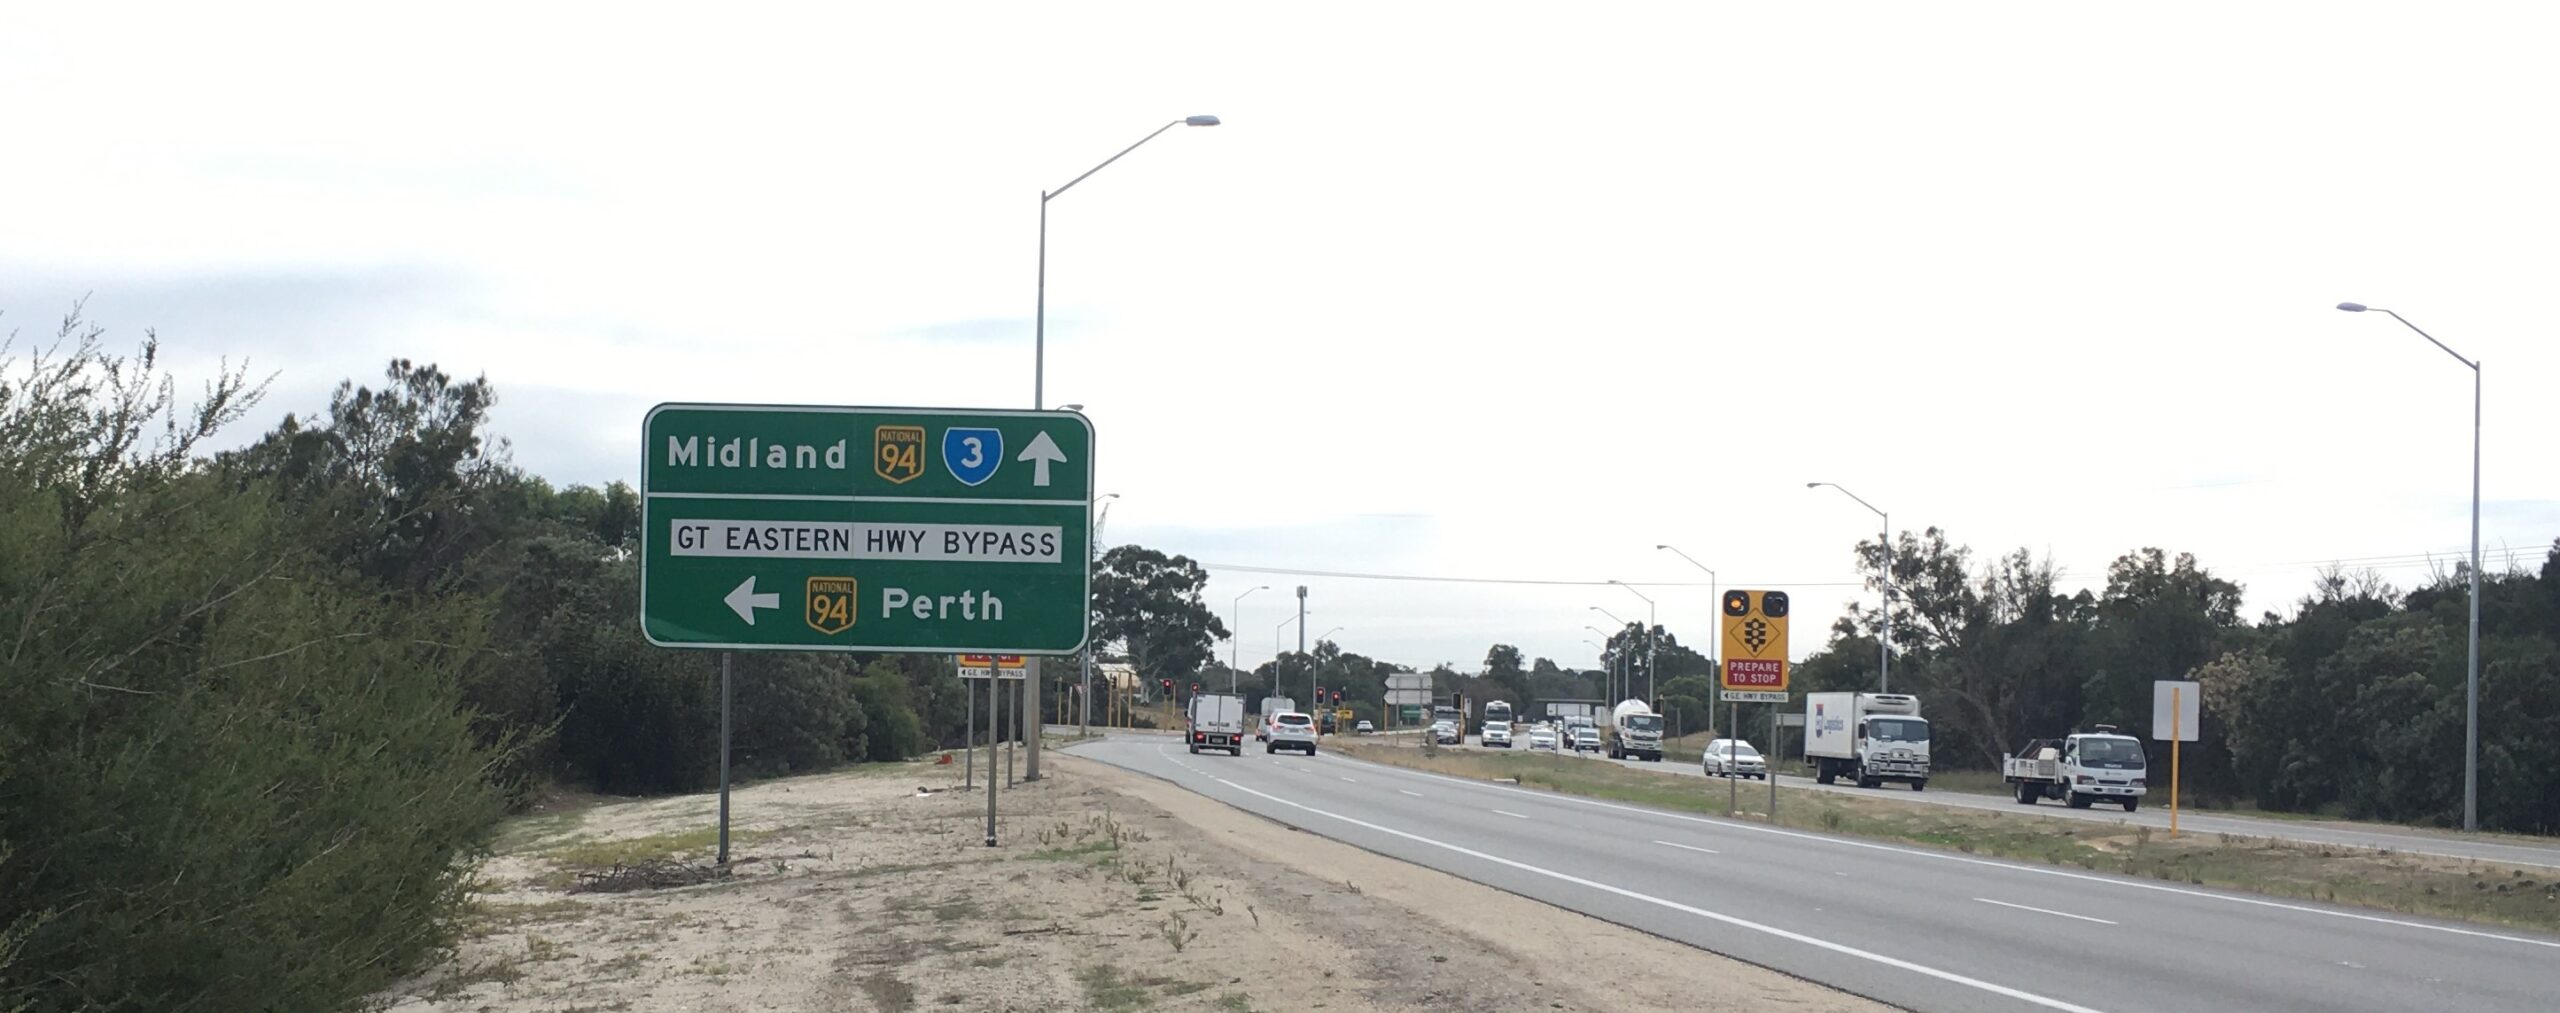 Great Eastern Highway Bypass Interchanges